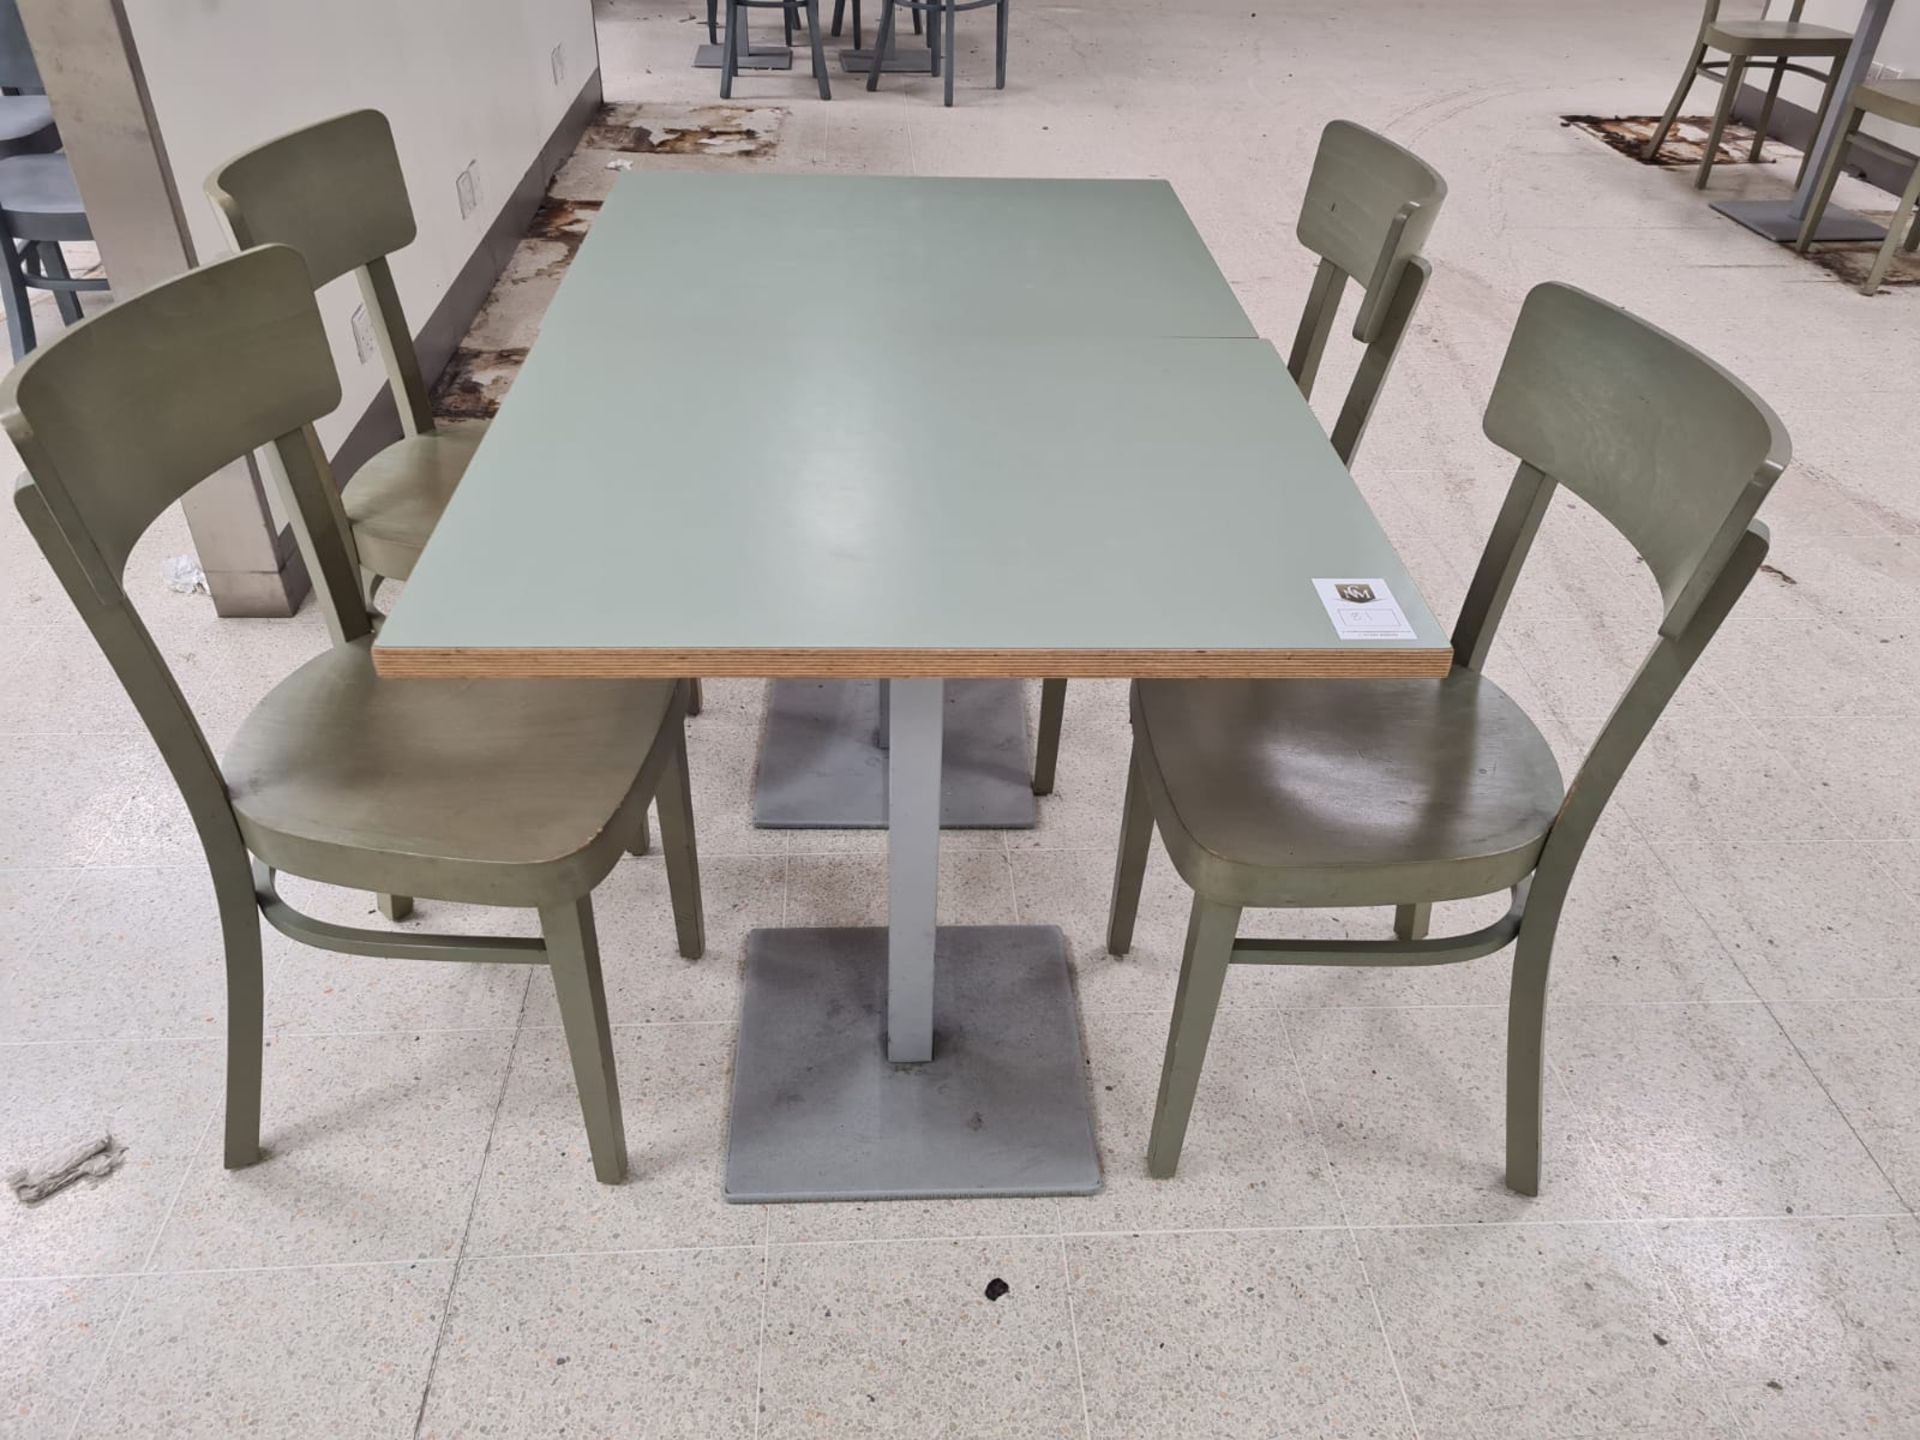 Restraunt Table x2 and 4 Green Chairs